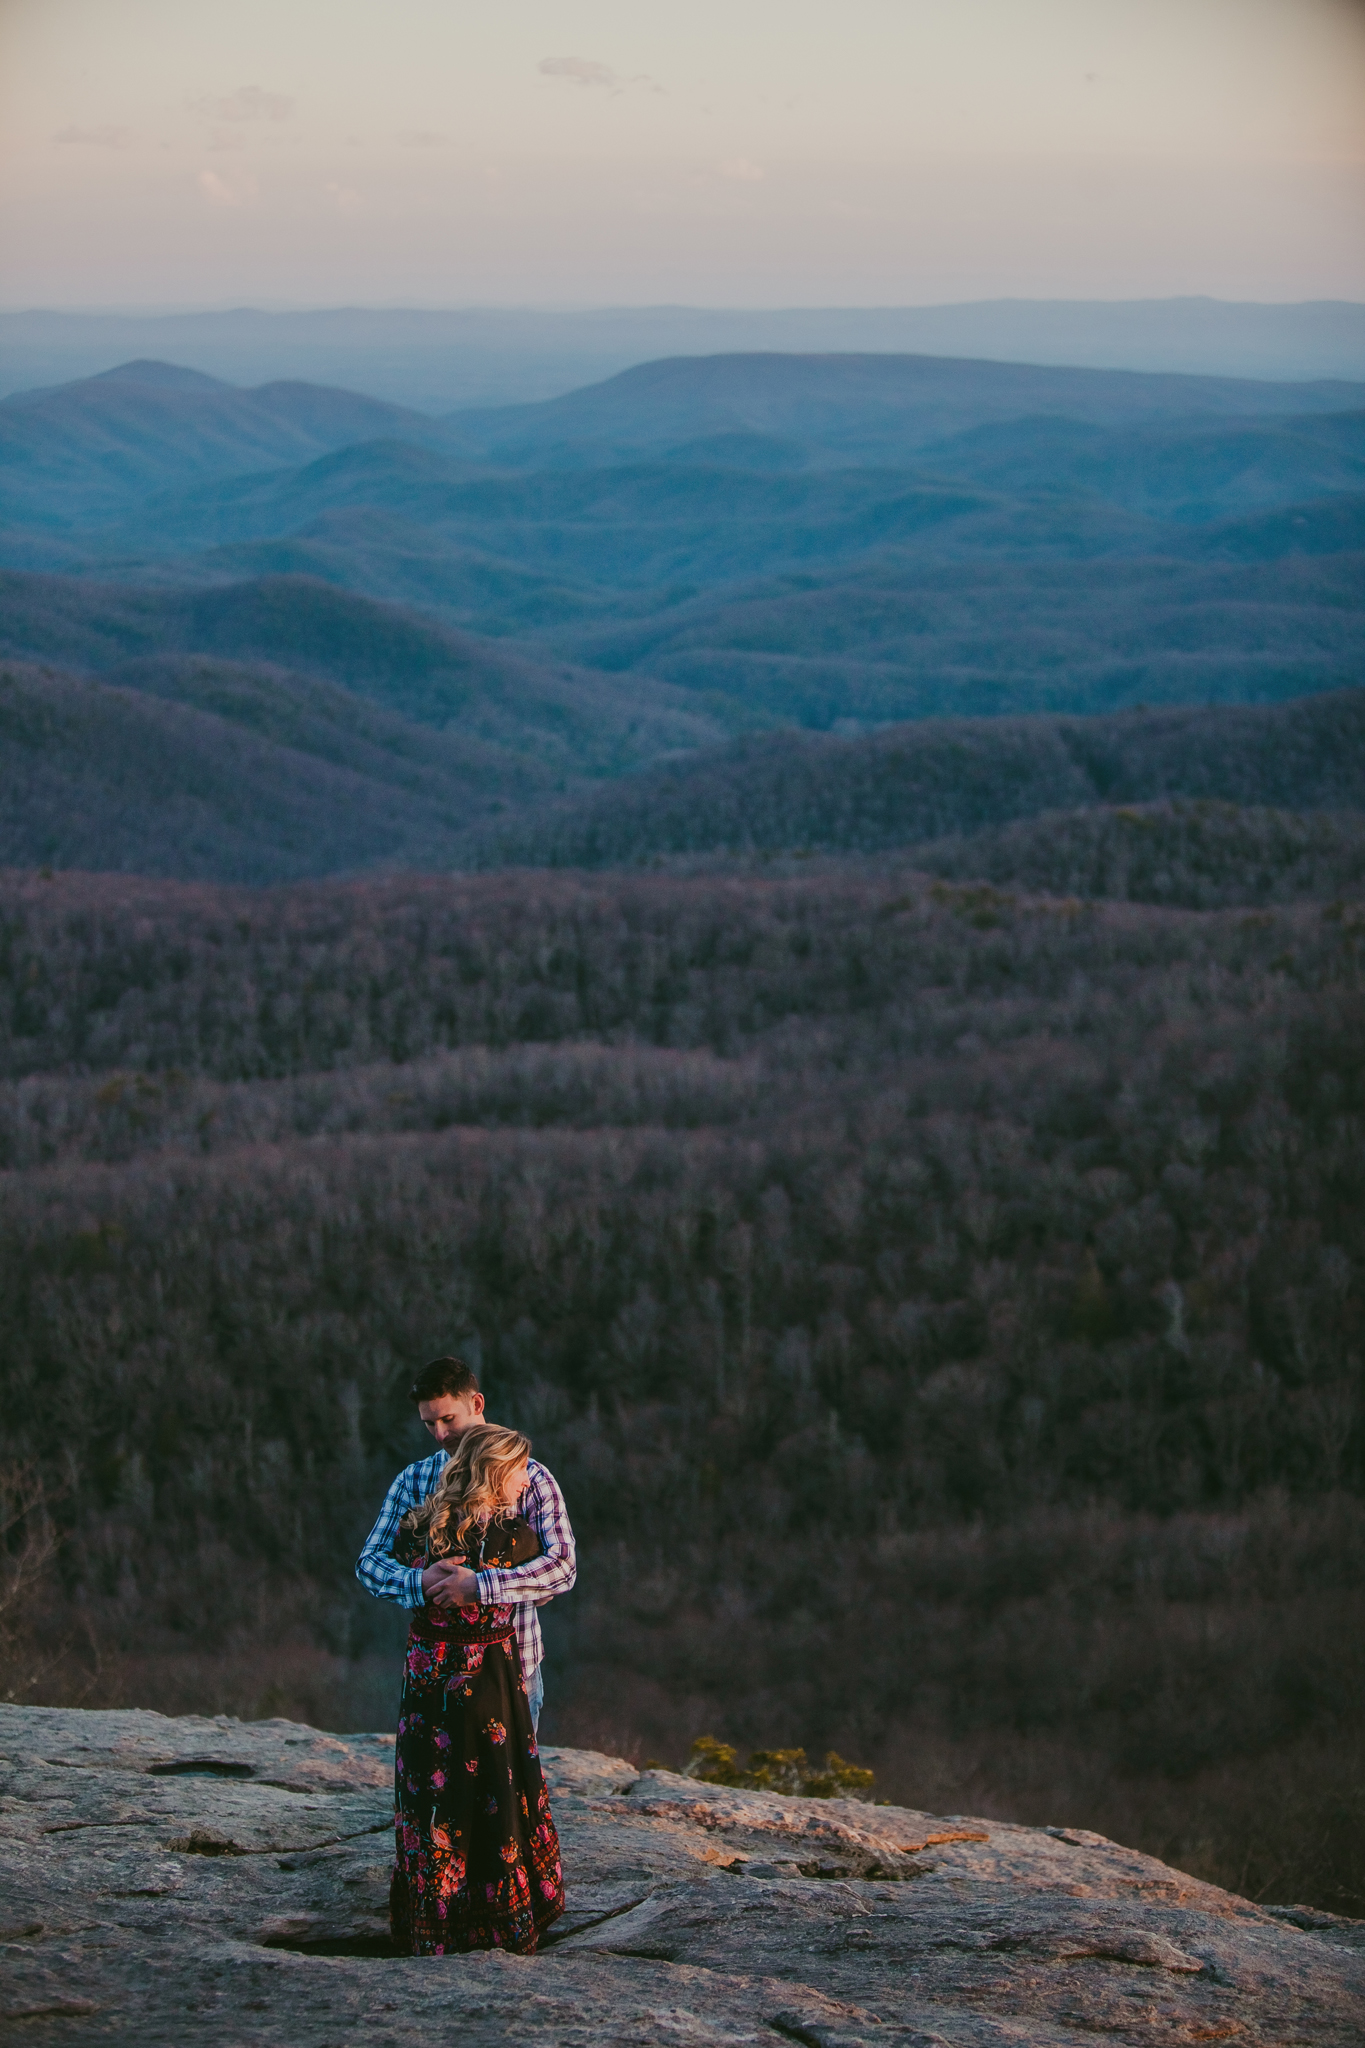 An epic view of the Appalachain mountains from the top of Beacon Heights during a Mabyn Ludke Photography engagement session